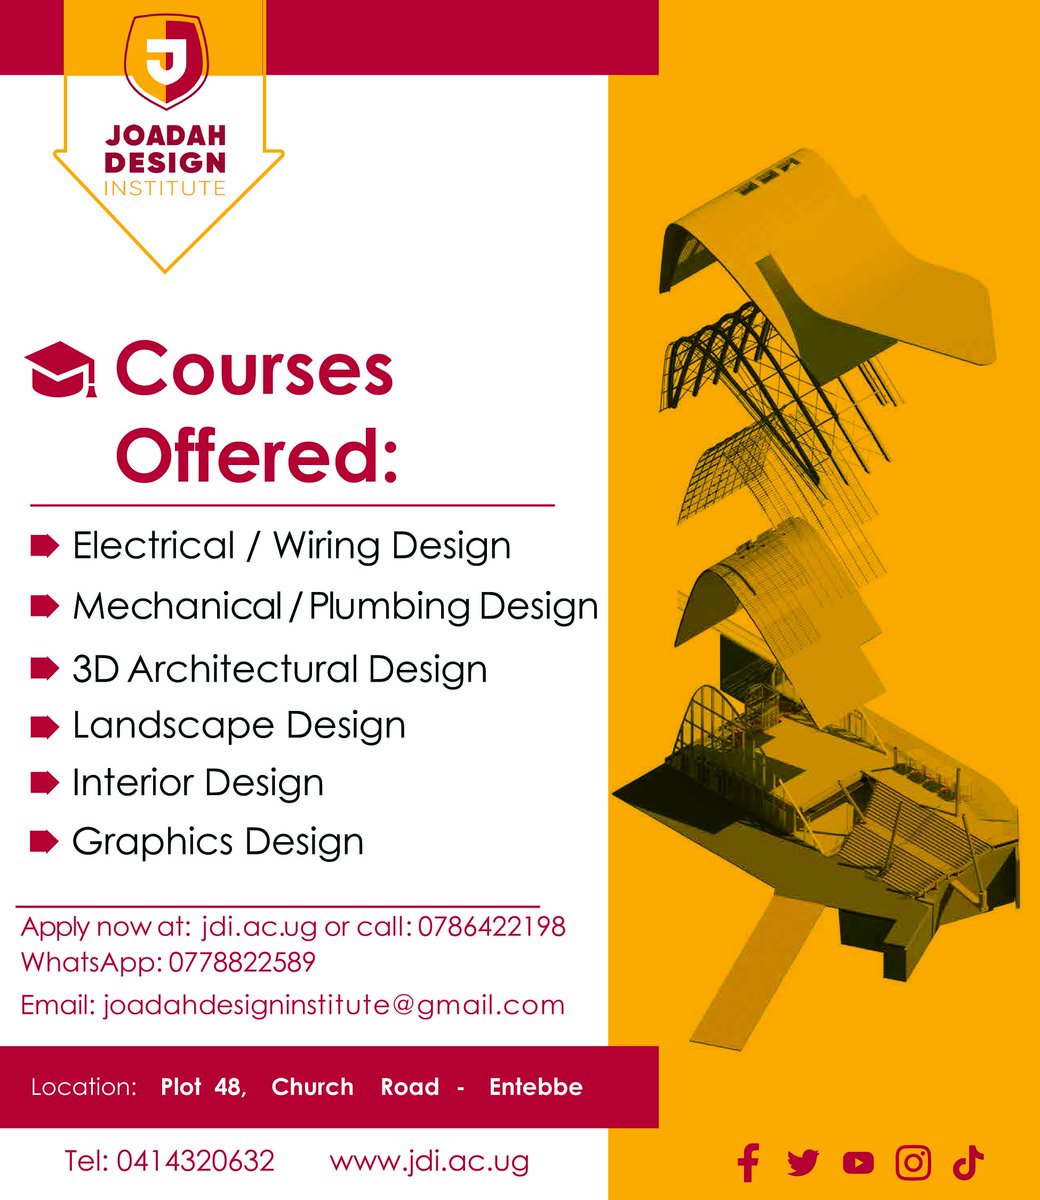 You can choose among these courses we offer at Joadah Design Institute for your up-skill.